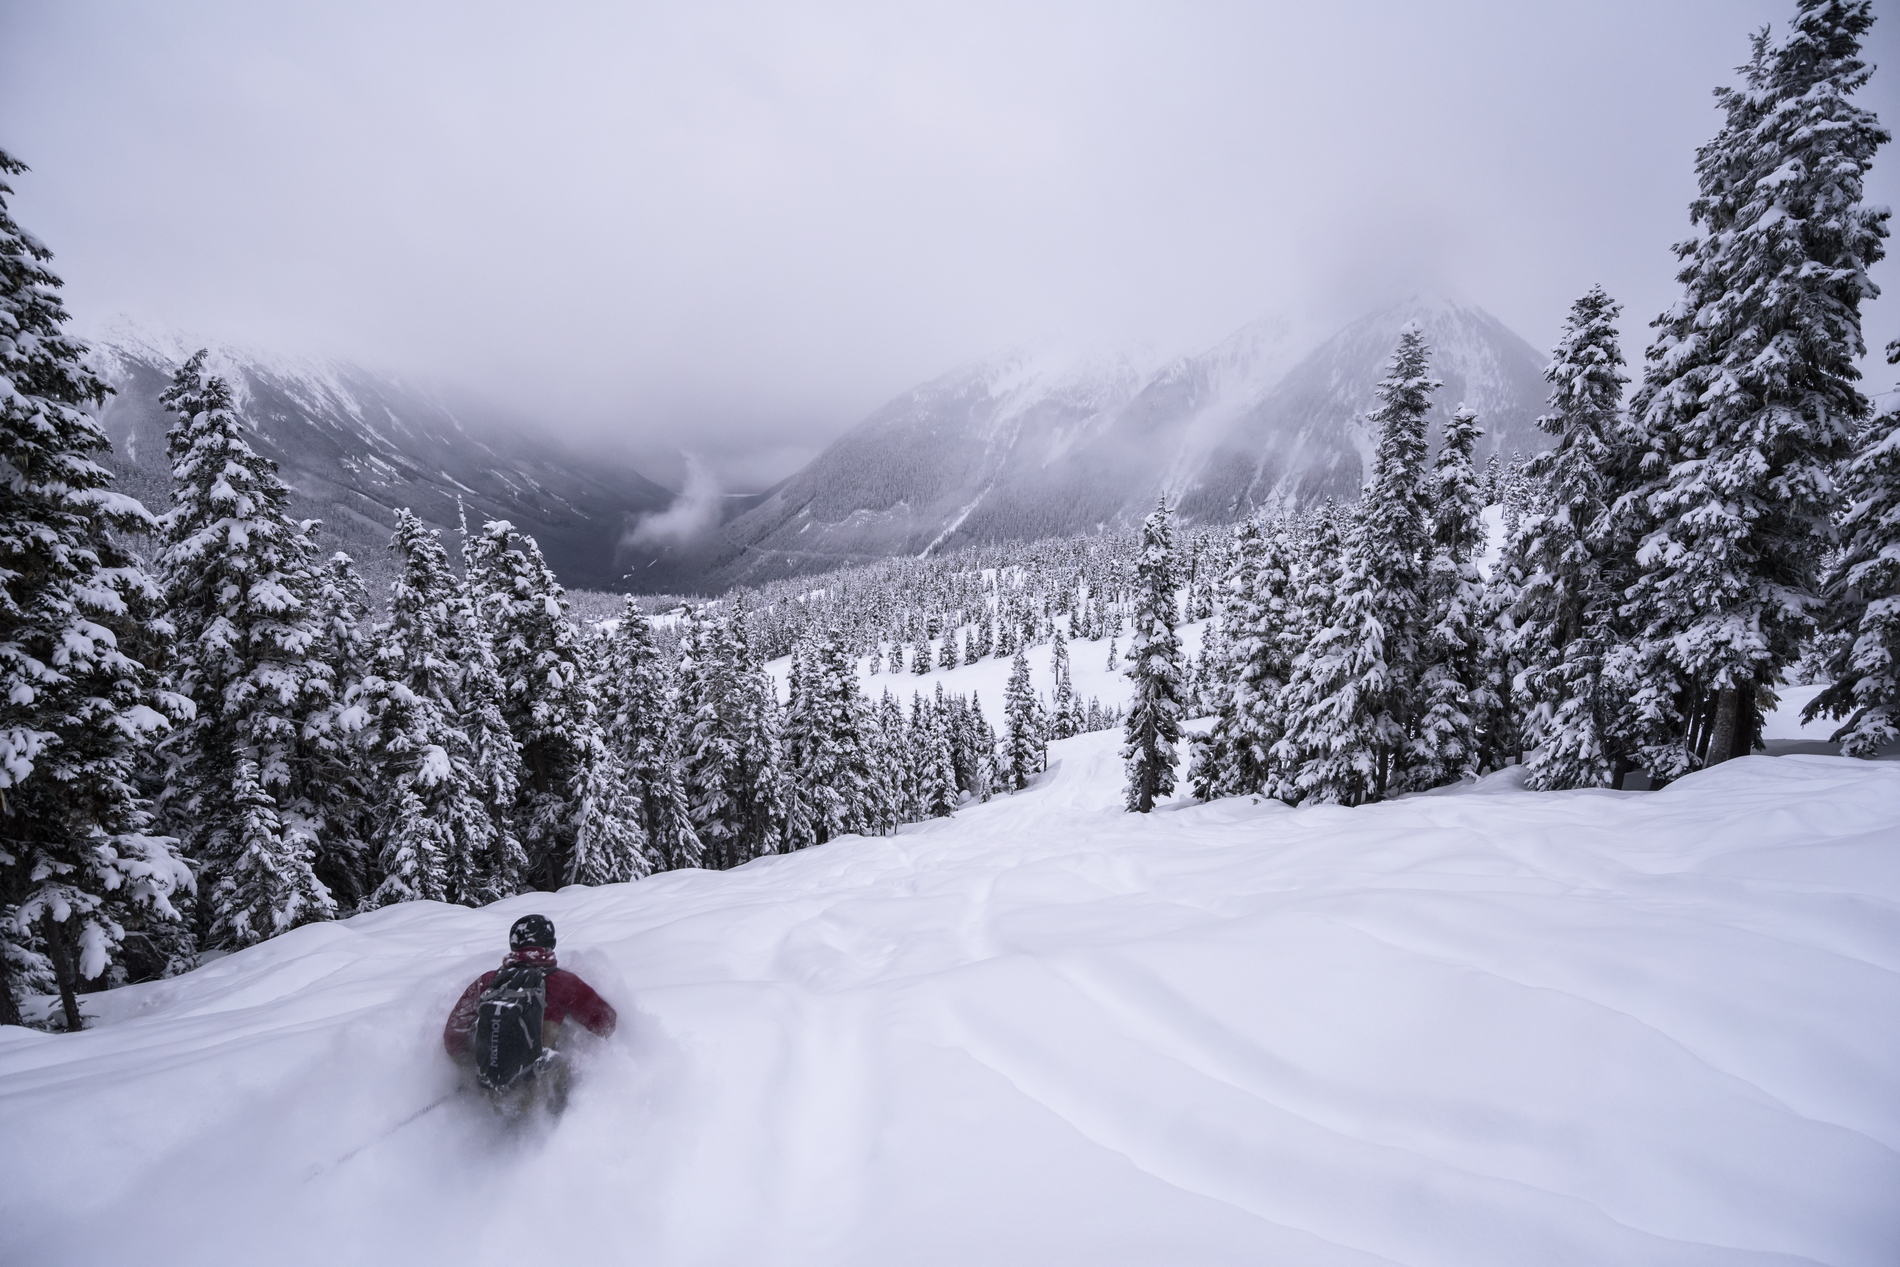 Downhill skiing with heavy powder at Shames Mountain Ski Area, Terrace BC | Andrew Strain